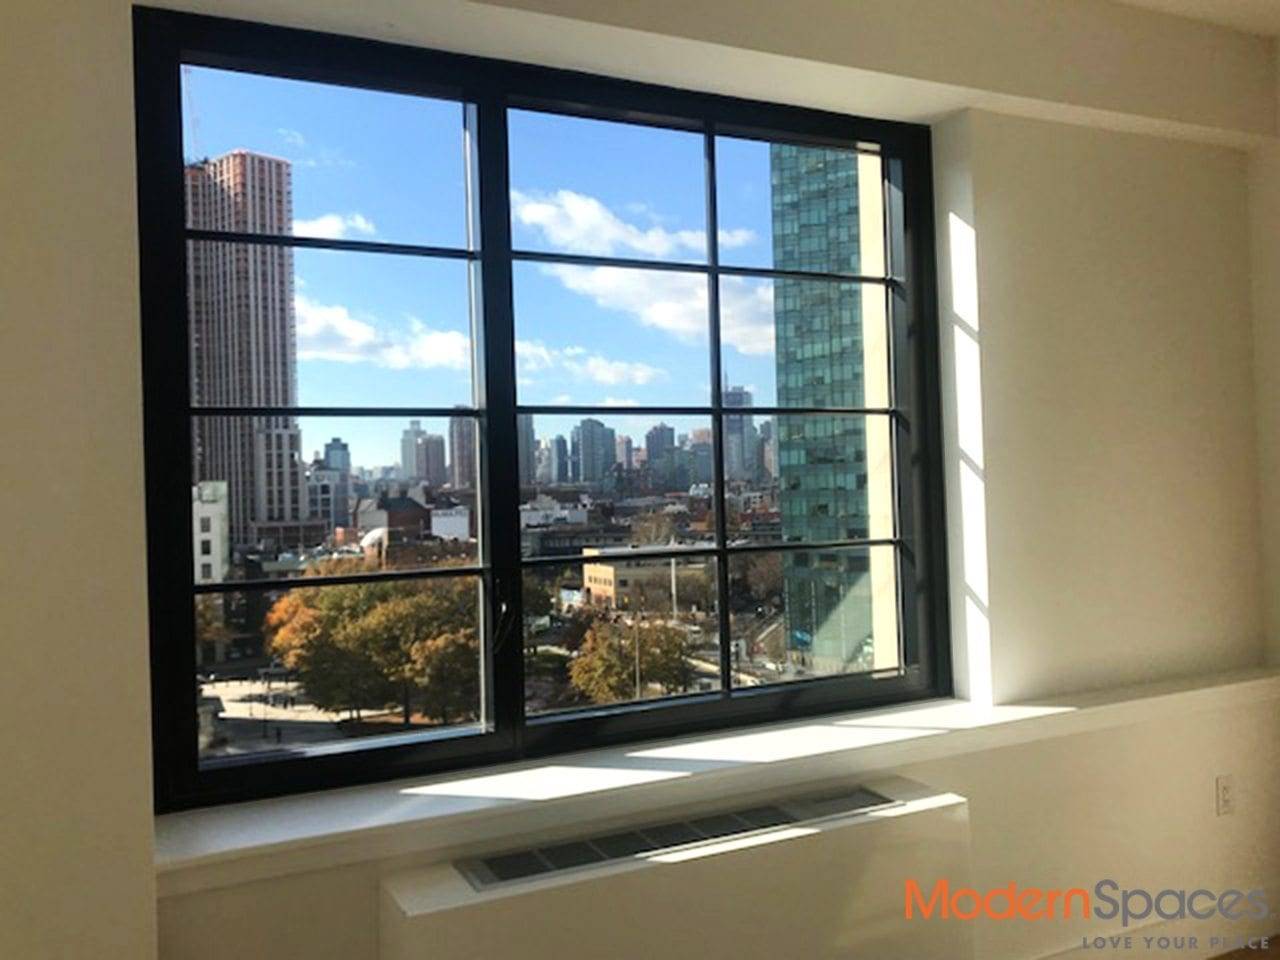 PARTIAL MANHATTAN VIEWS at BRIGHT 1 BEDROOM CONDO at STATELY HARRISONRevised SPRING Pricing appliedA for this rental with distant Manhattan skyline views that can be partially seen from this 8th ...